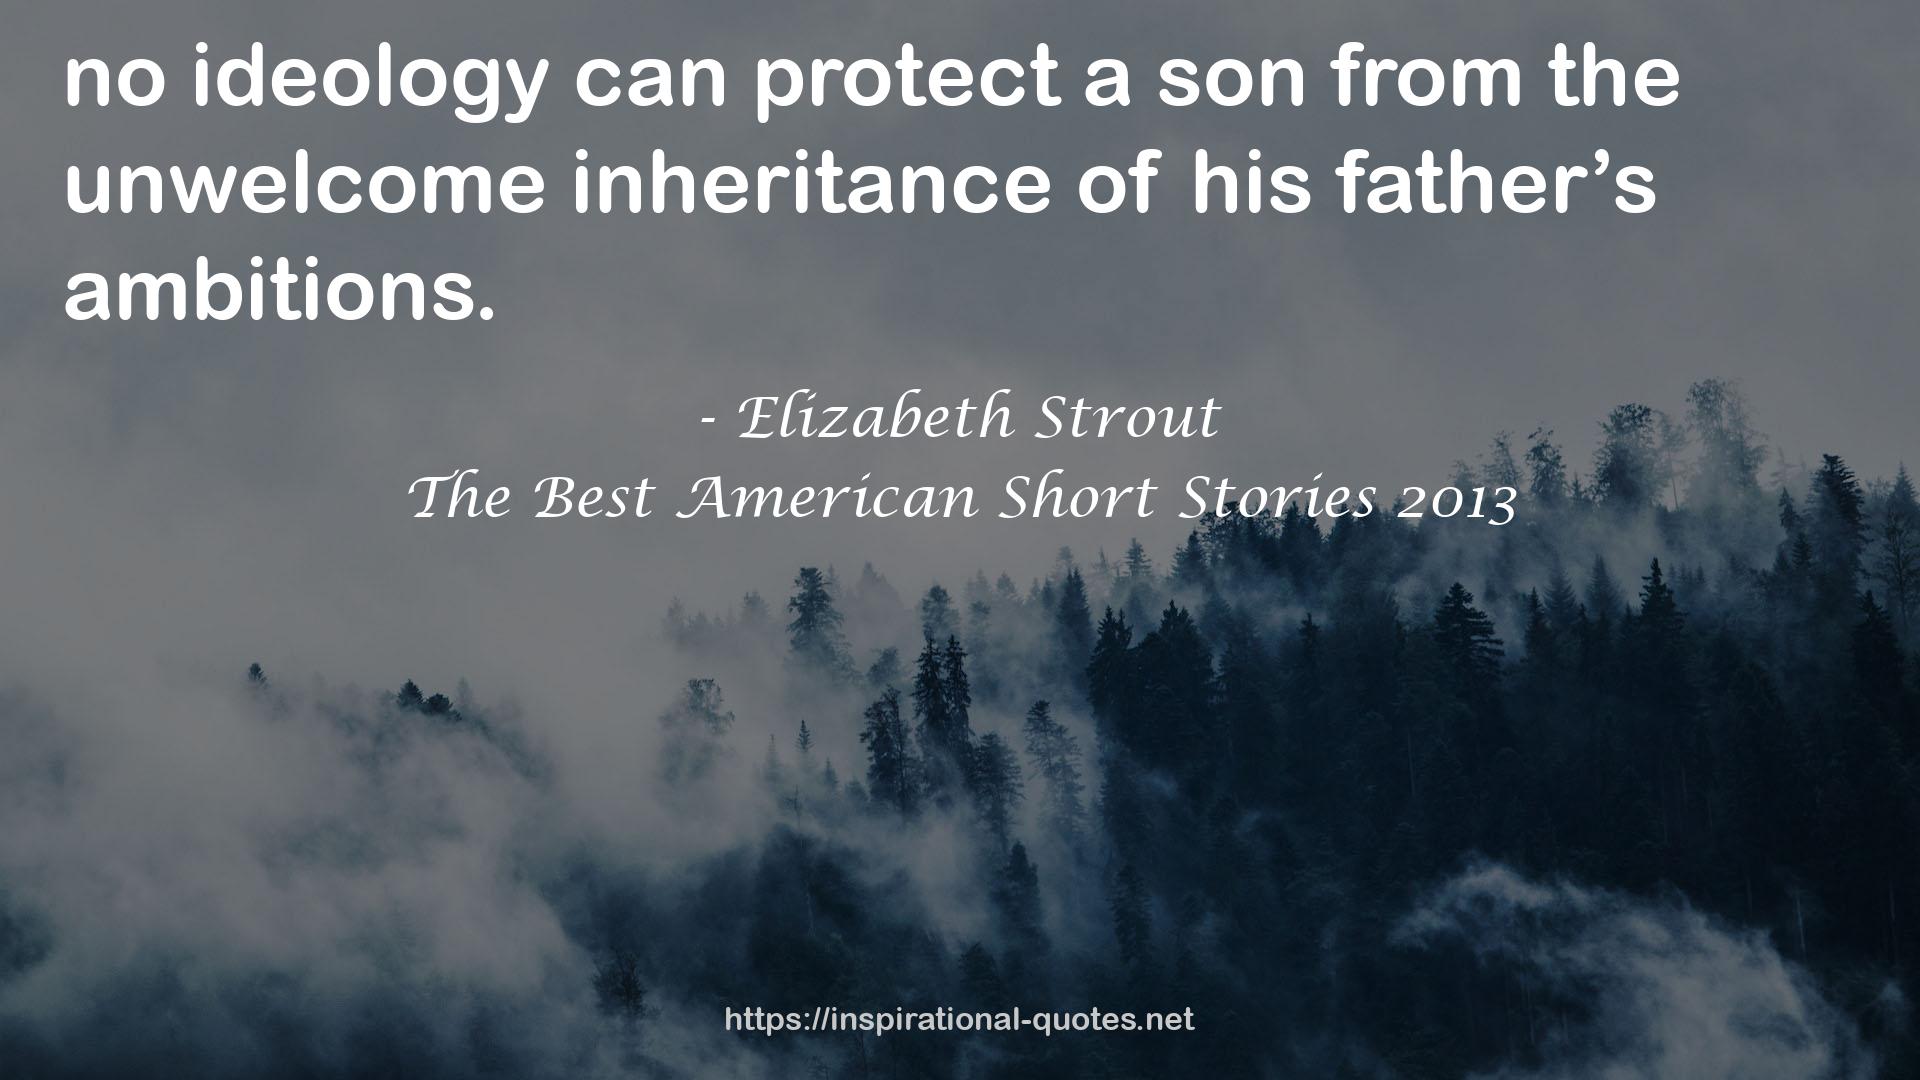 The Best American Short Stories 2013 QUOTES